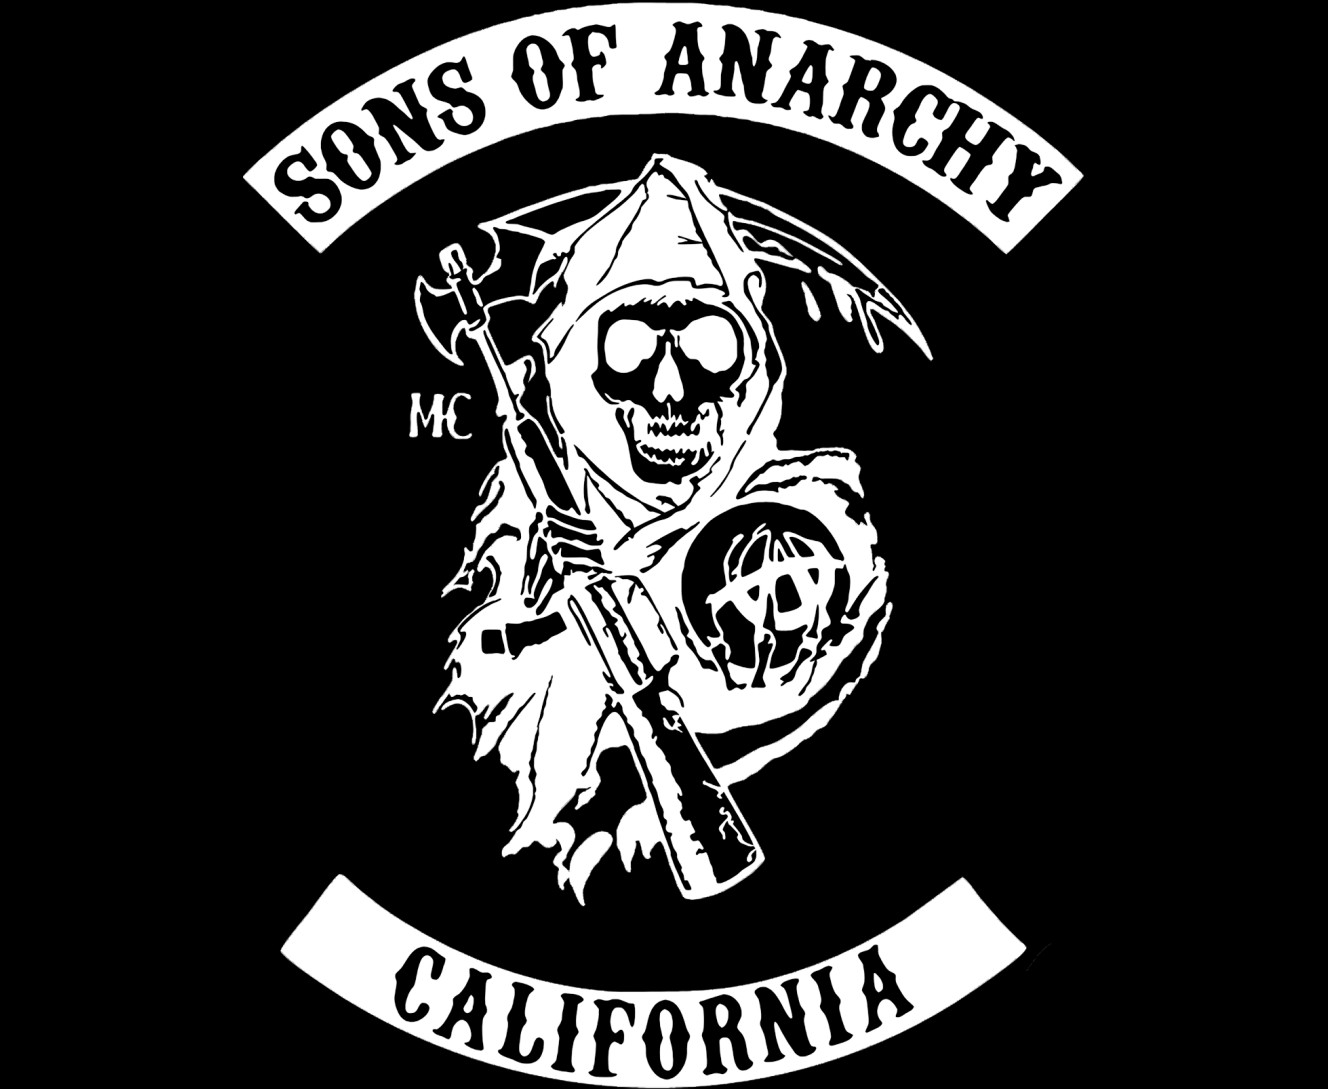 Sons of Anarchy)